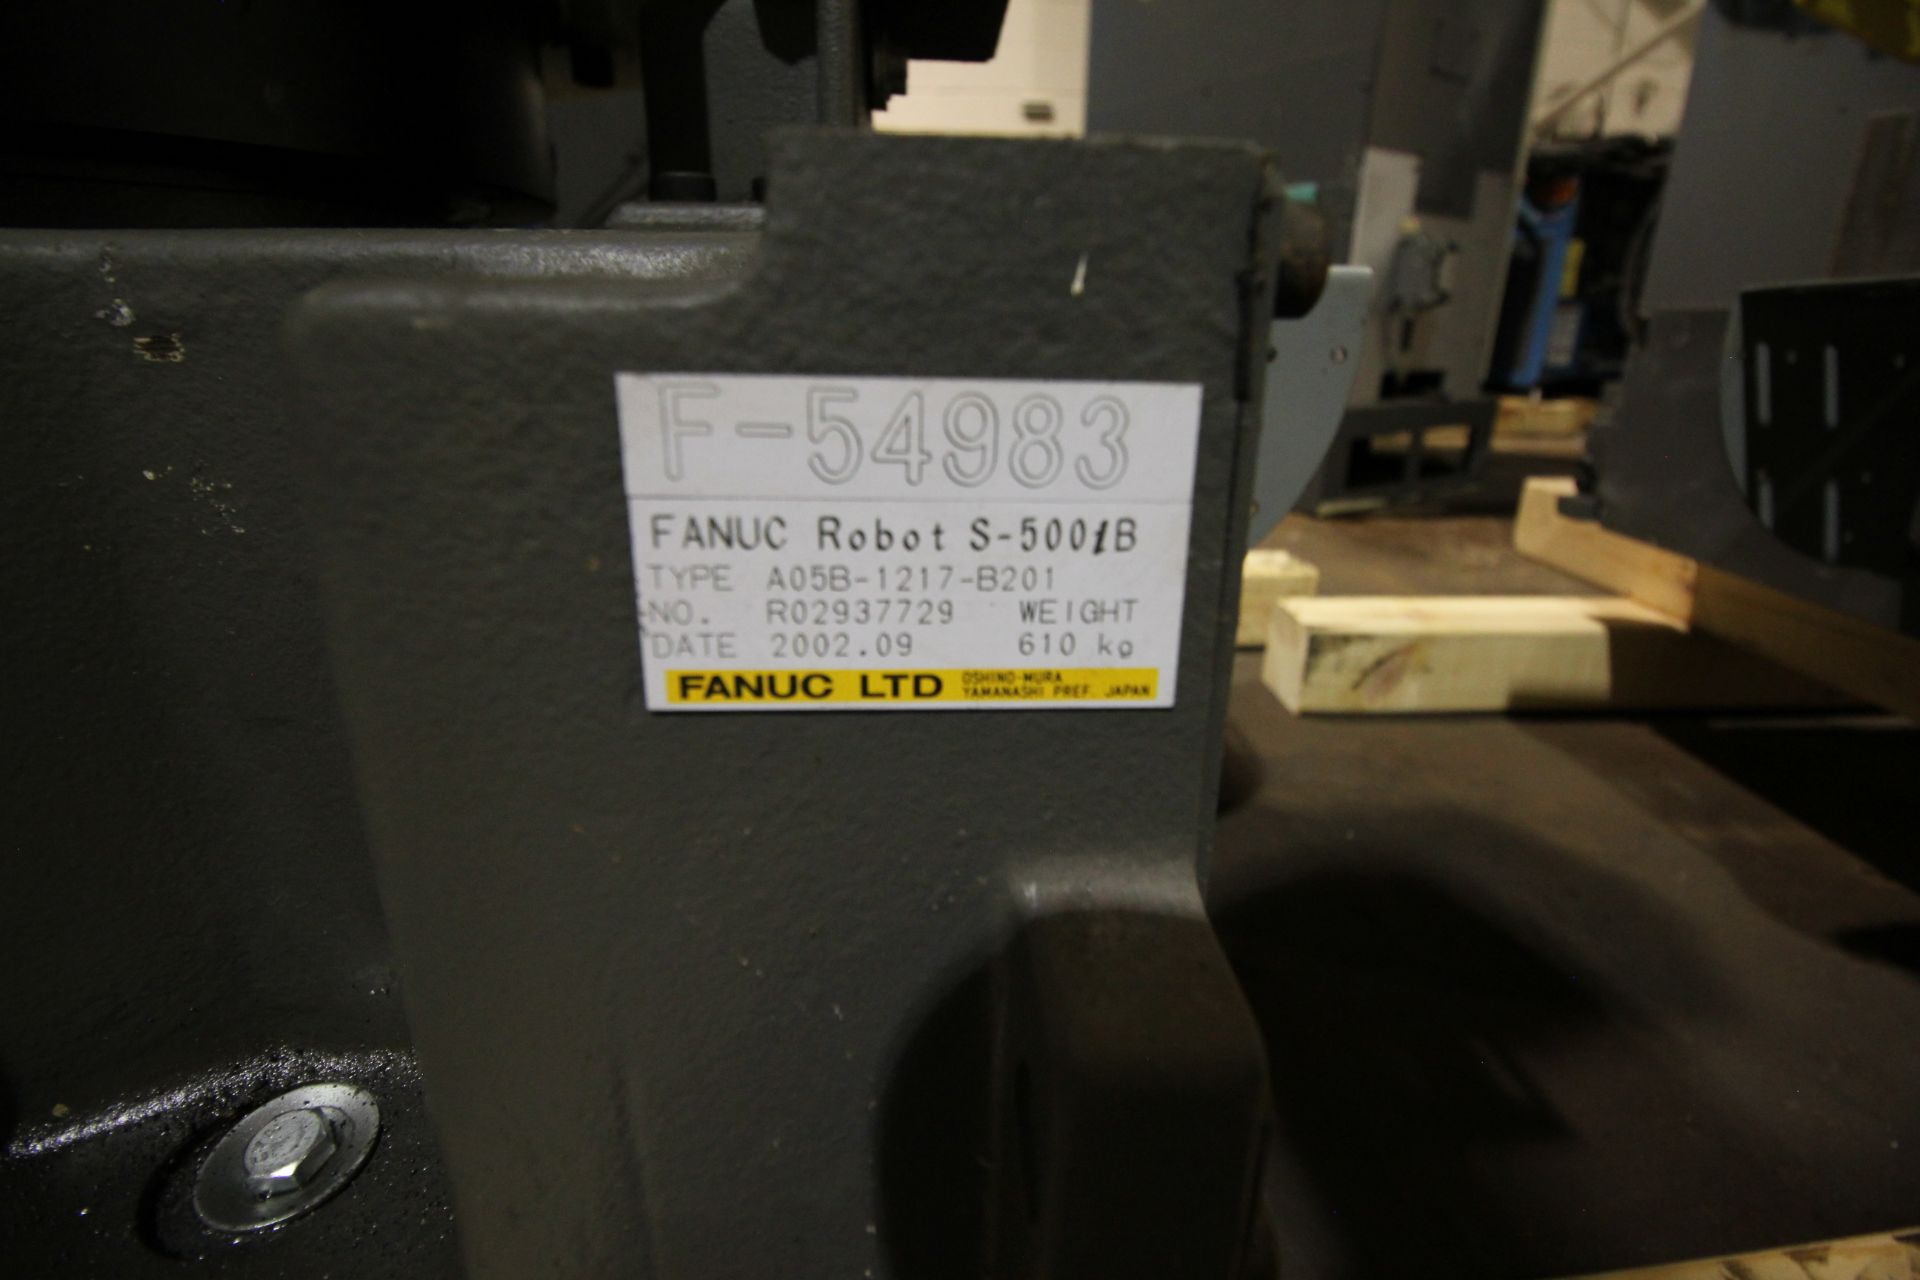 FANUC ROBOT S-500iB WITH R-J3iB CONTROLS, TEACH PENDANT & CABLES, YEAR 2002, SN 54983 - Image 7 of 7